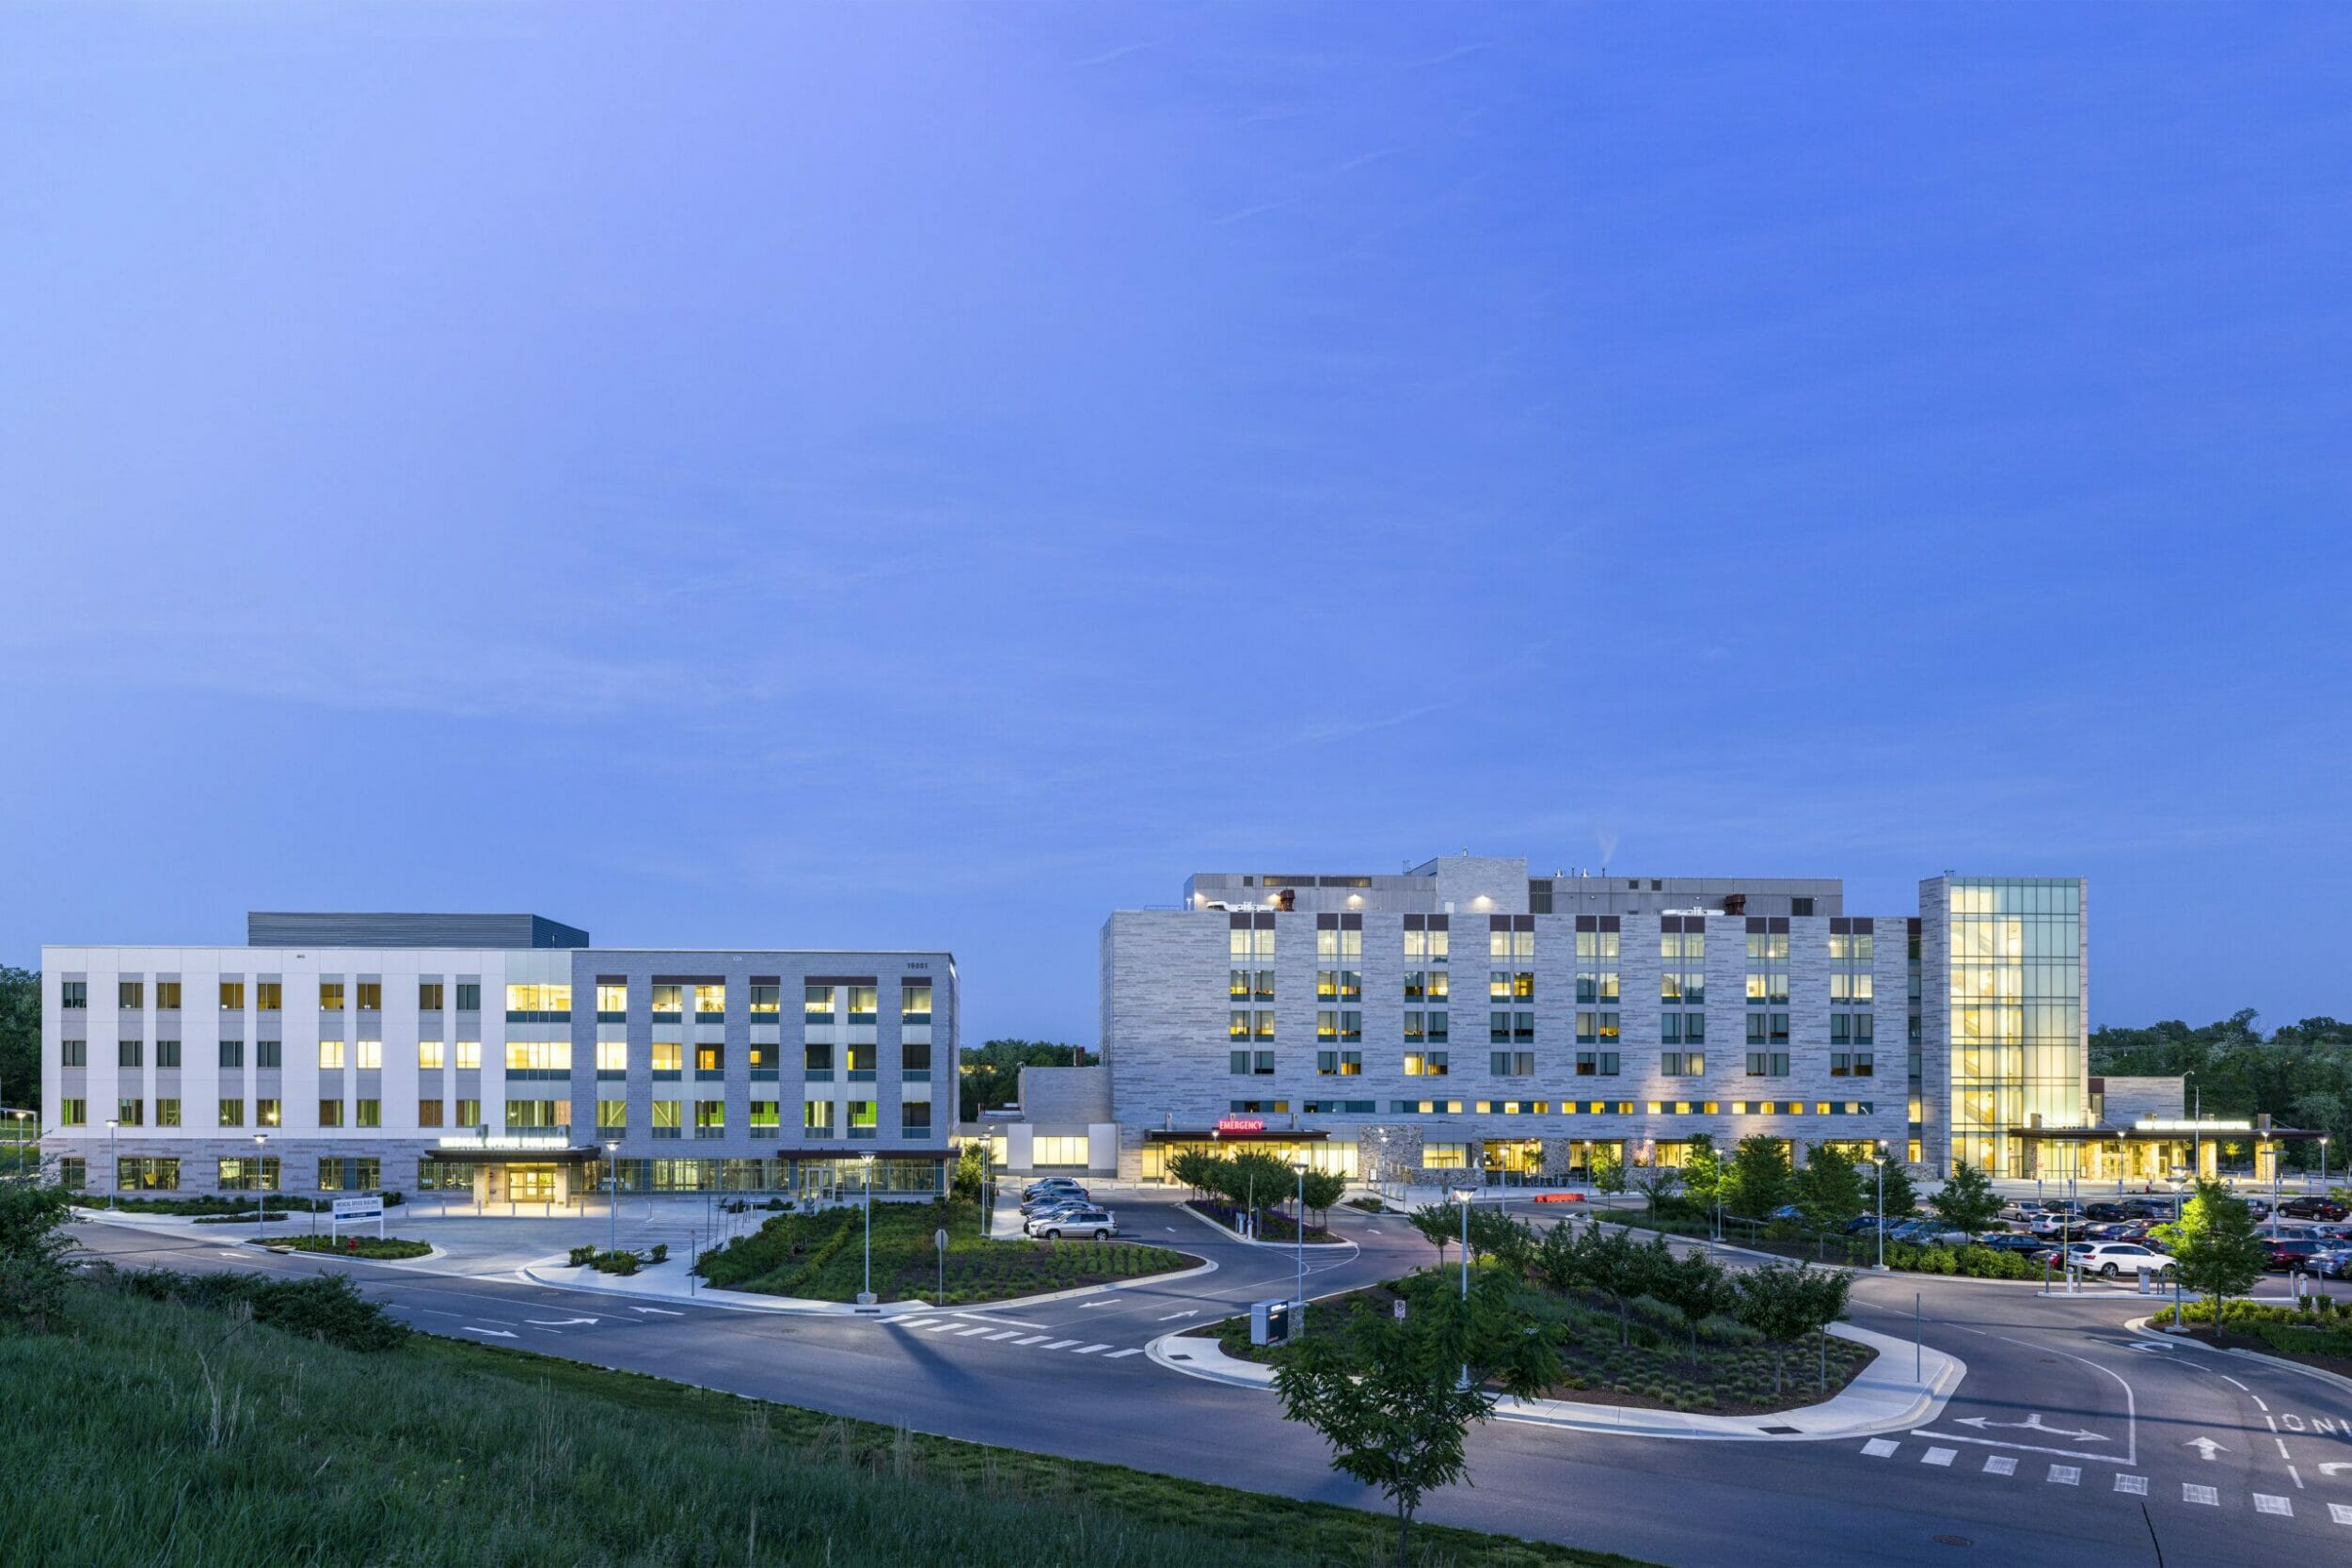 Exterior panoramic view of medical office building connecting to Holy Cross Germantown hospital at dusk